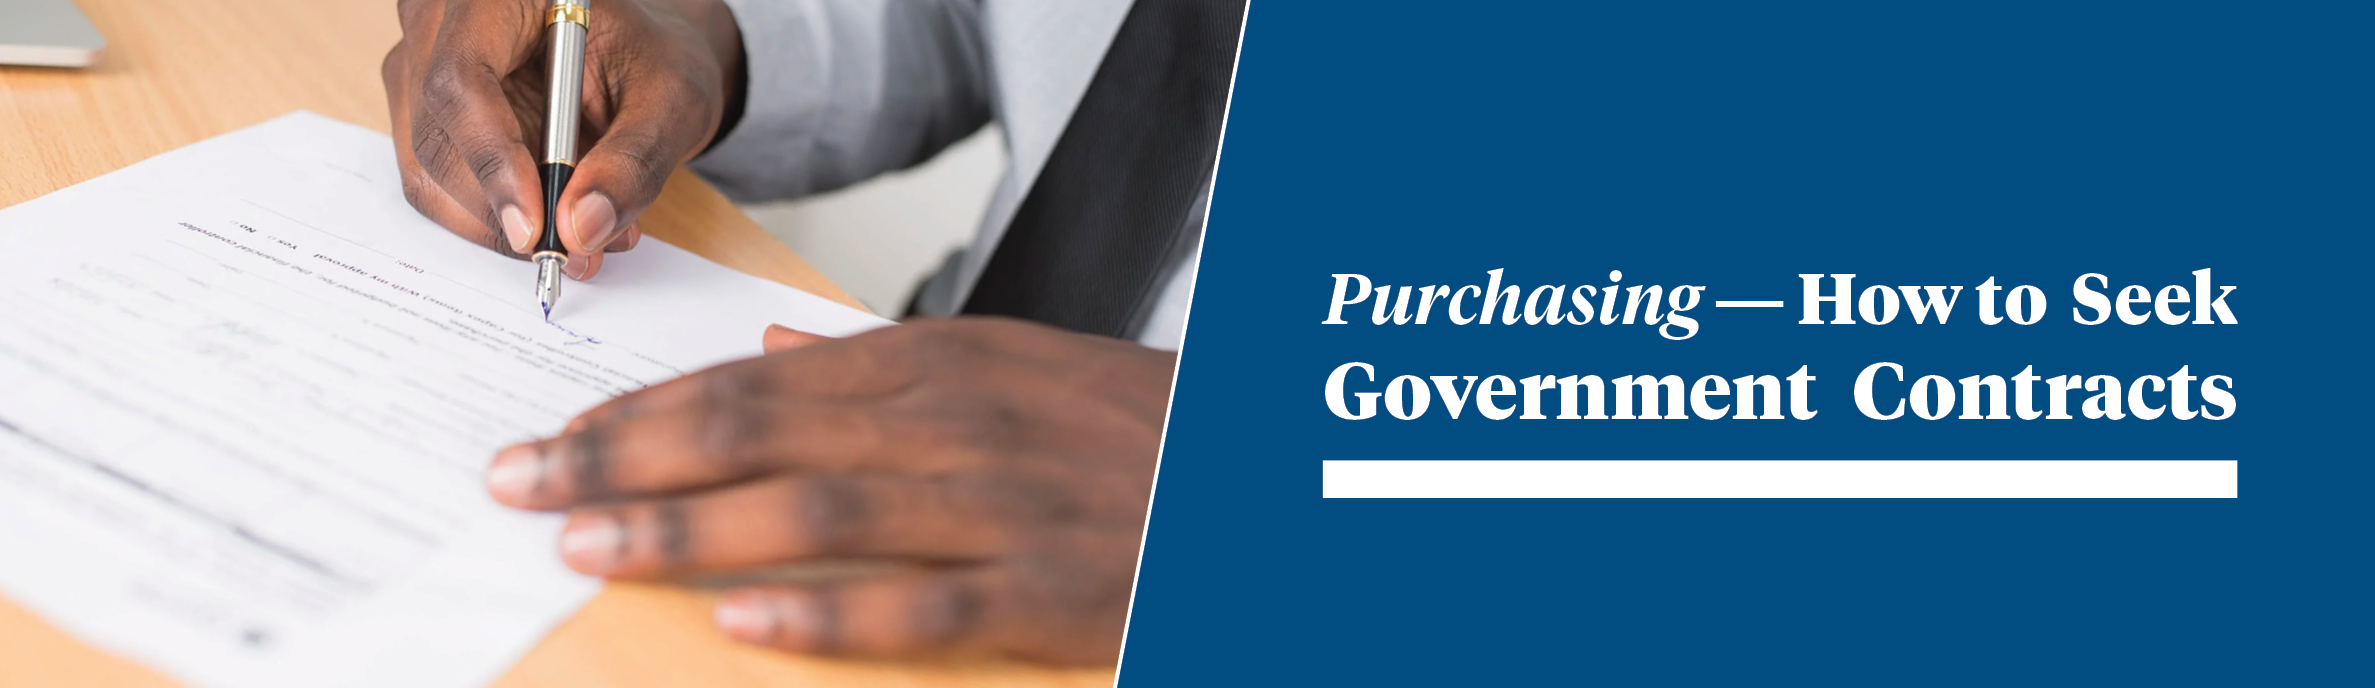 Purchasing - How to Government Contracts Frank HR Consulting